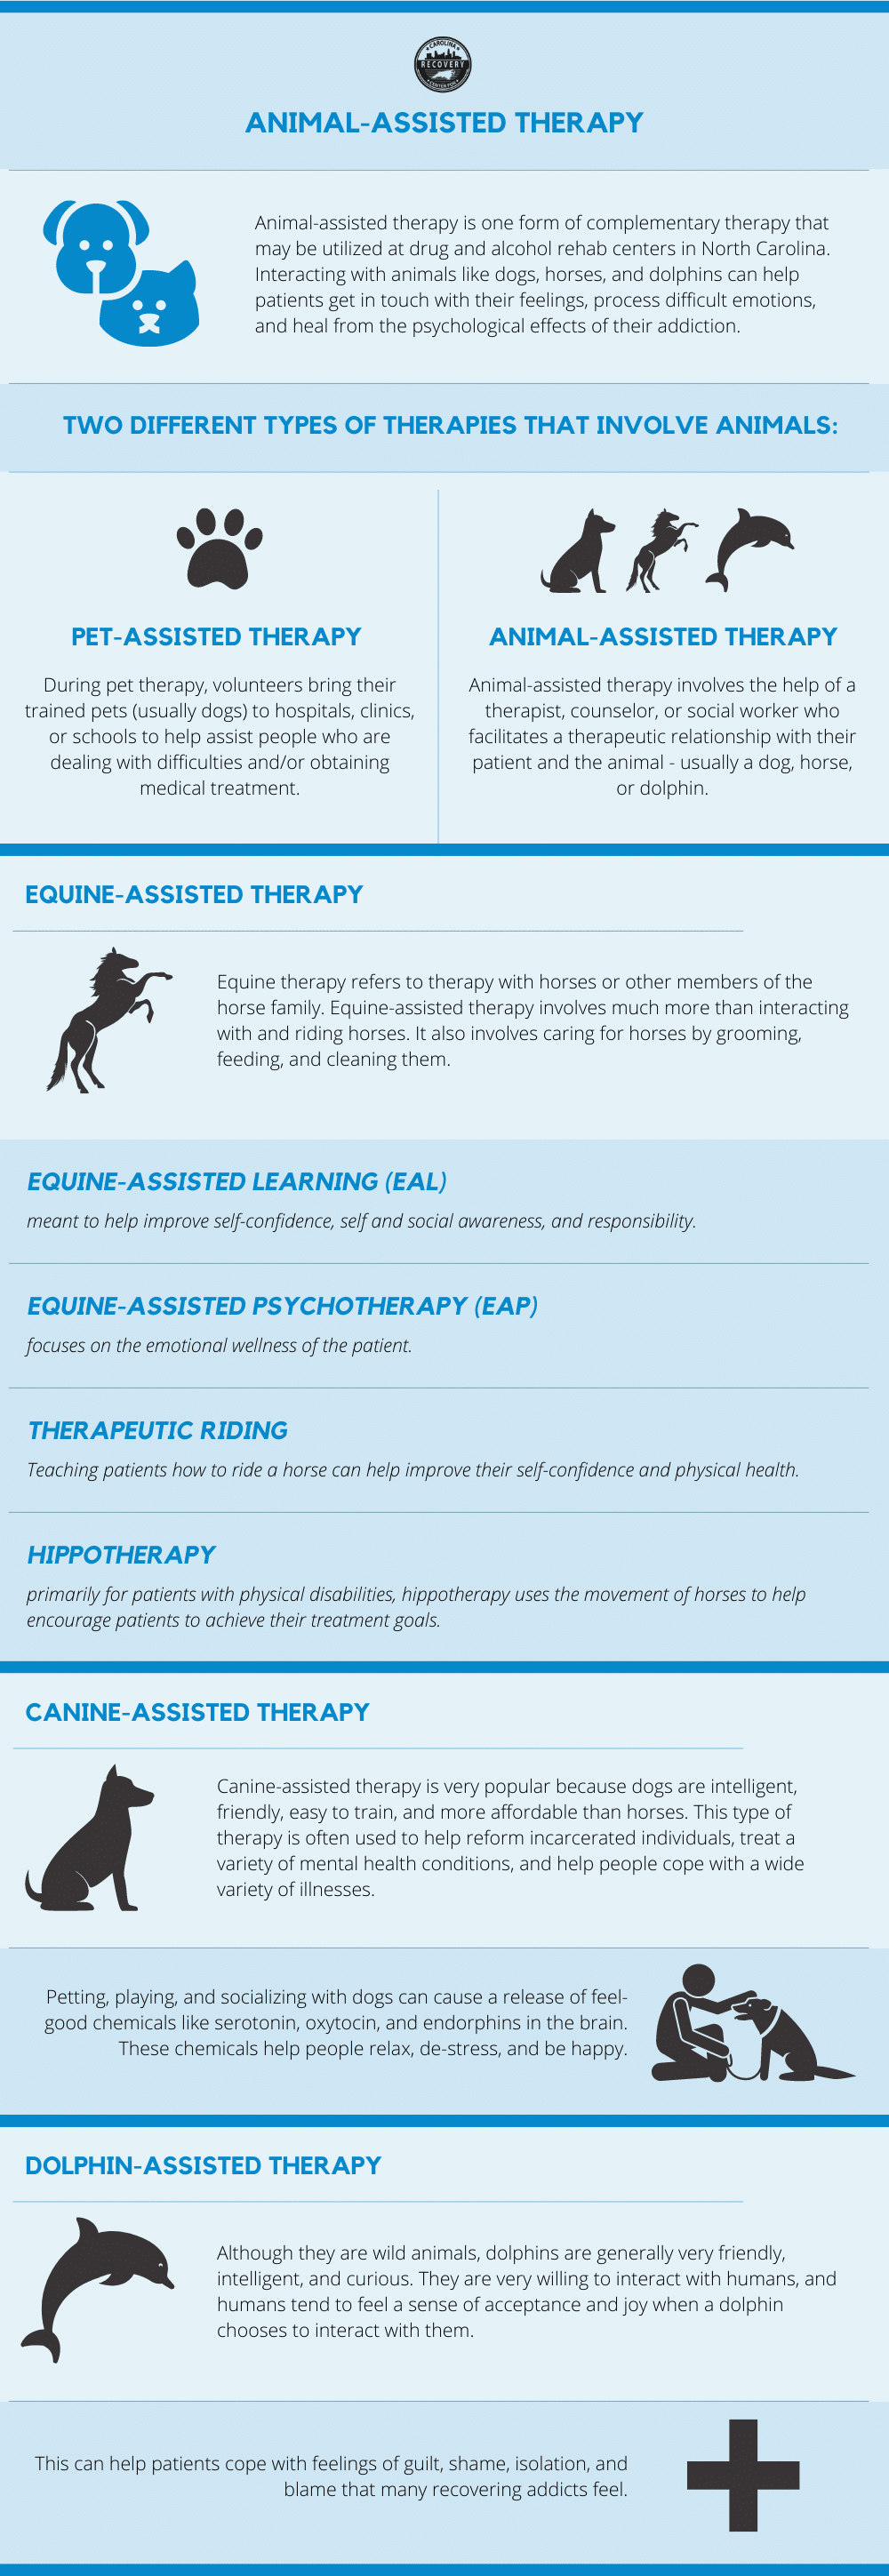 Animal-Assisted Therapy in Addiction Treatment - North Carolina Rehab